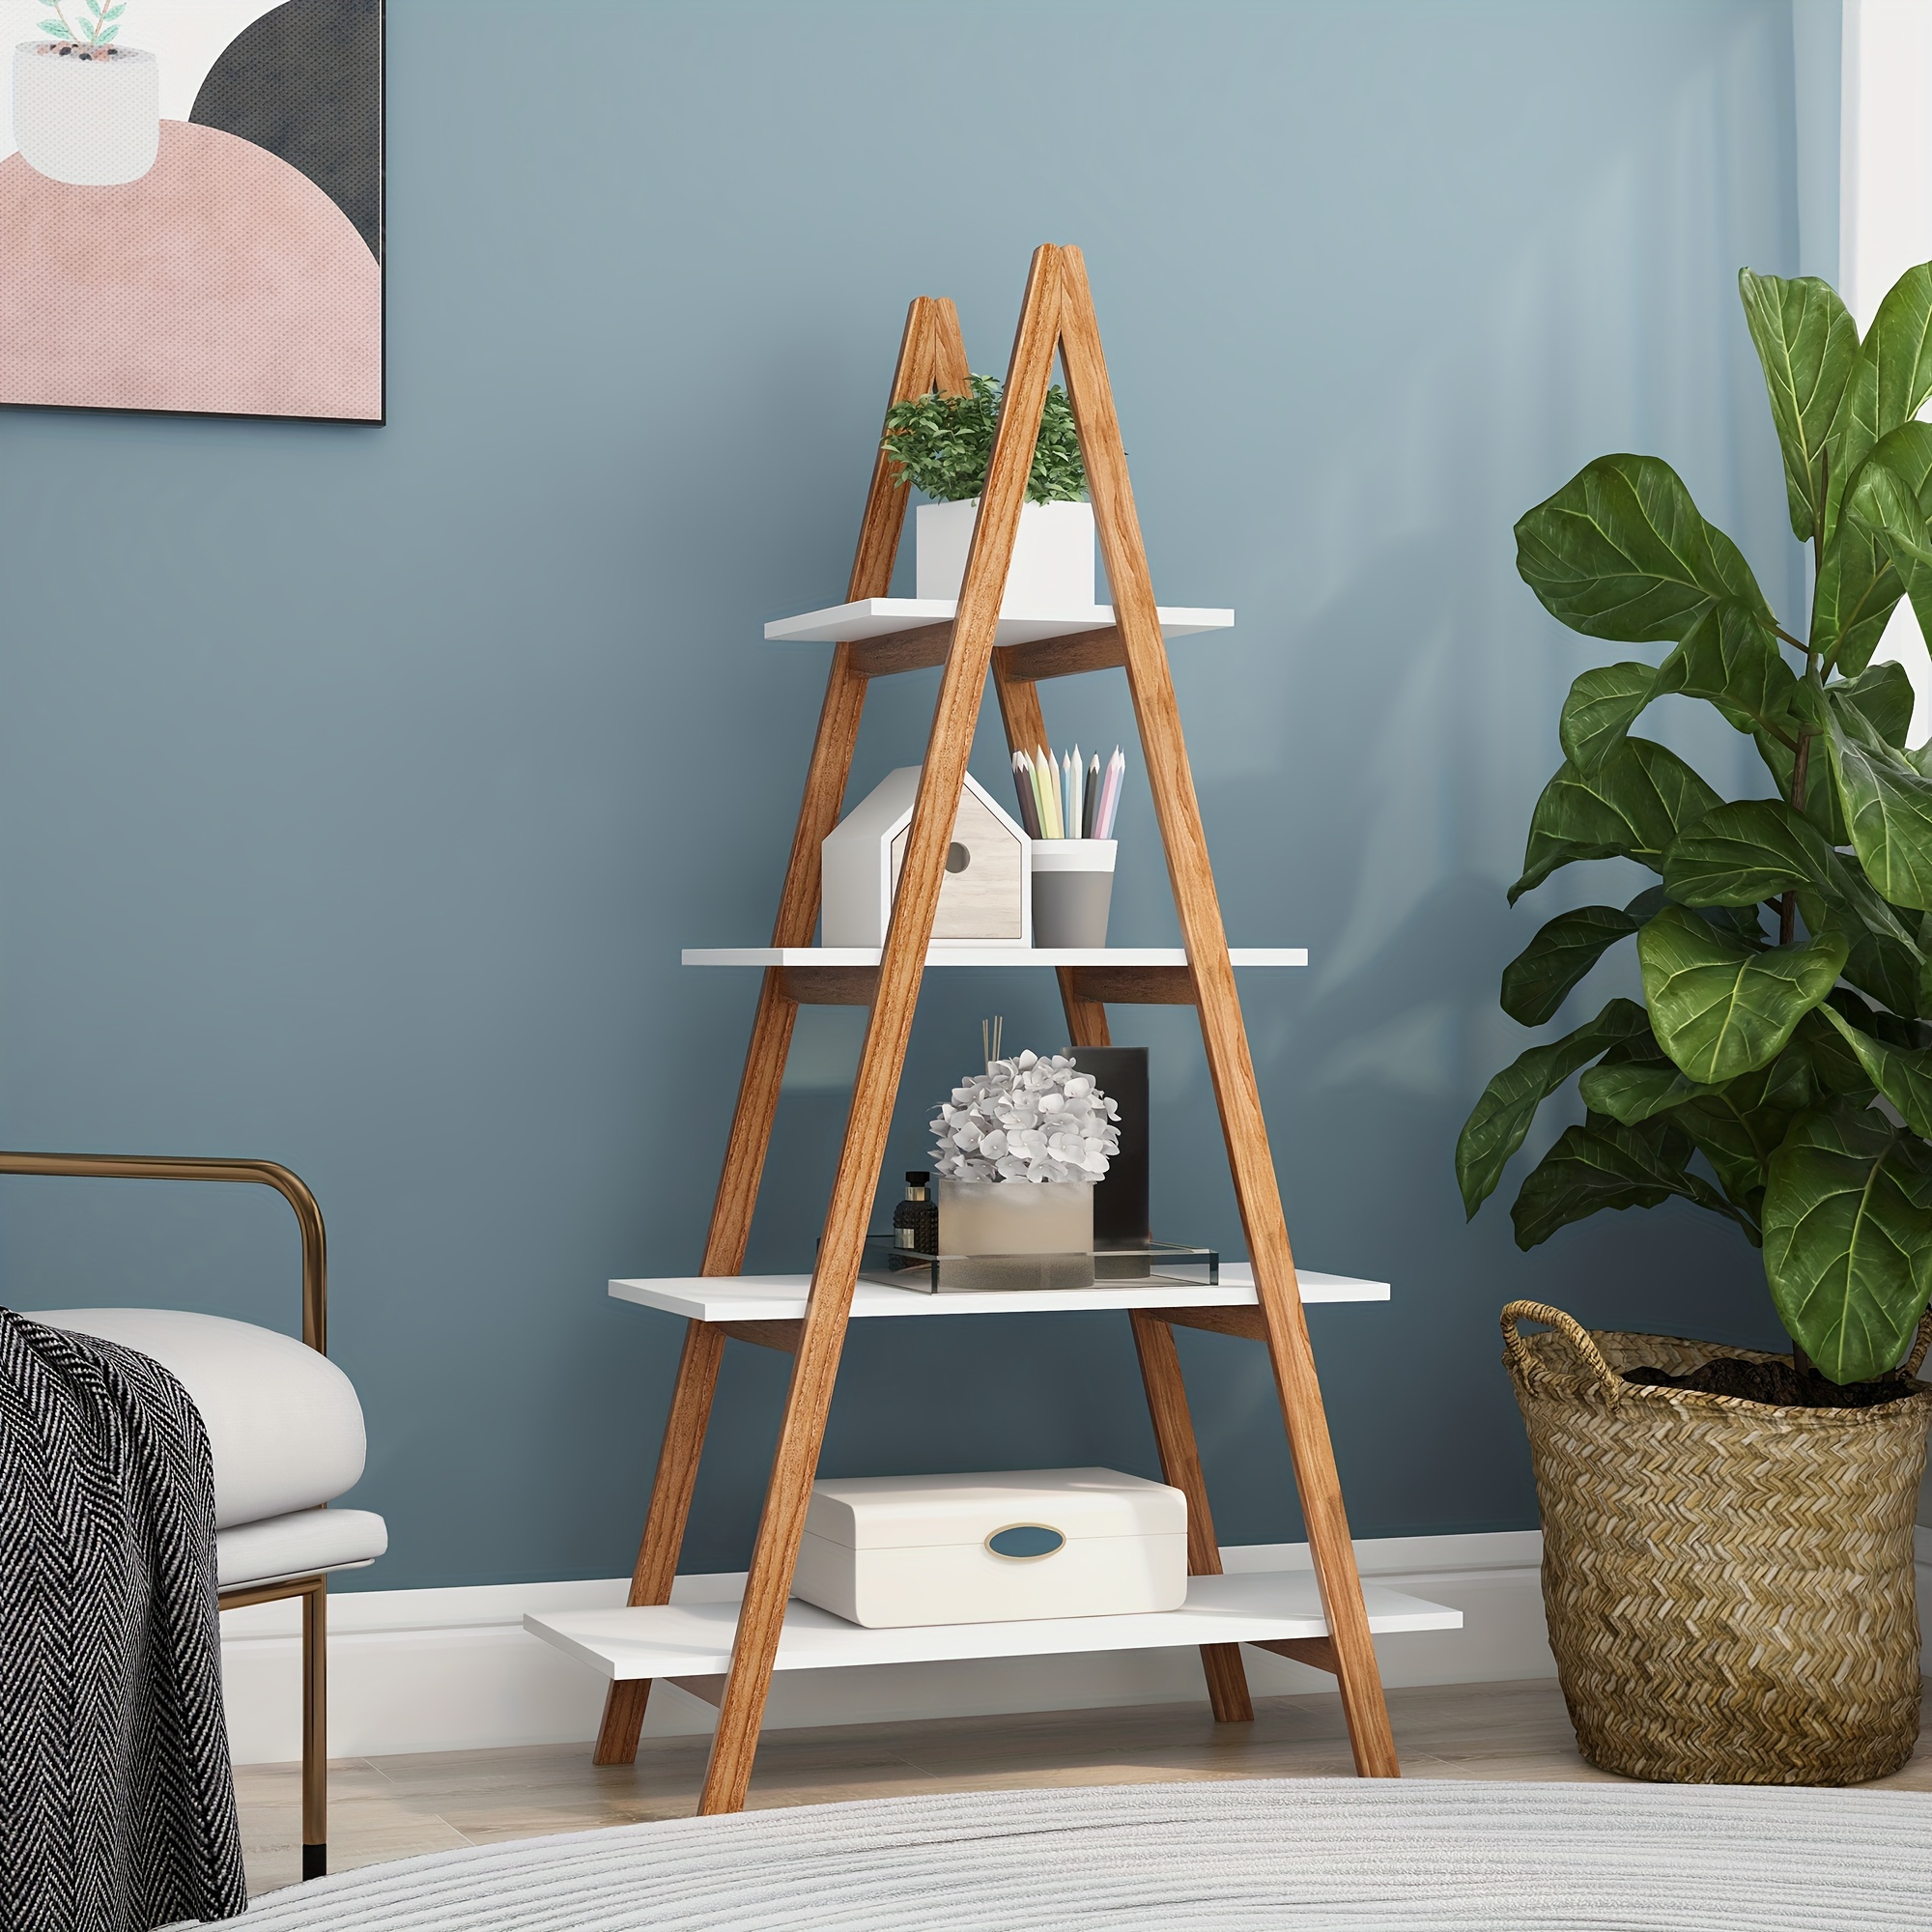 

1pc 5-tier A-frame Ladder Shelf, Solid Bamboo Wood Material, Freestanding Display Bookshelf, Plant Stand Storage Rack, For Home & Office Decor